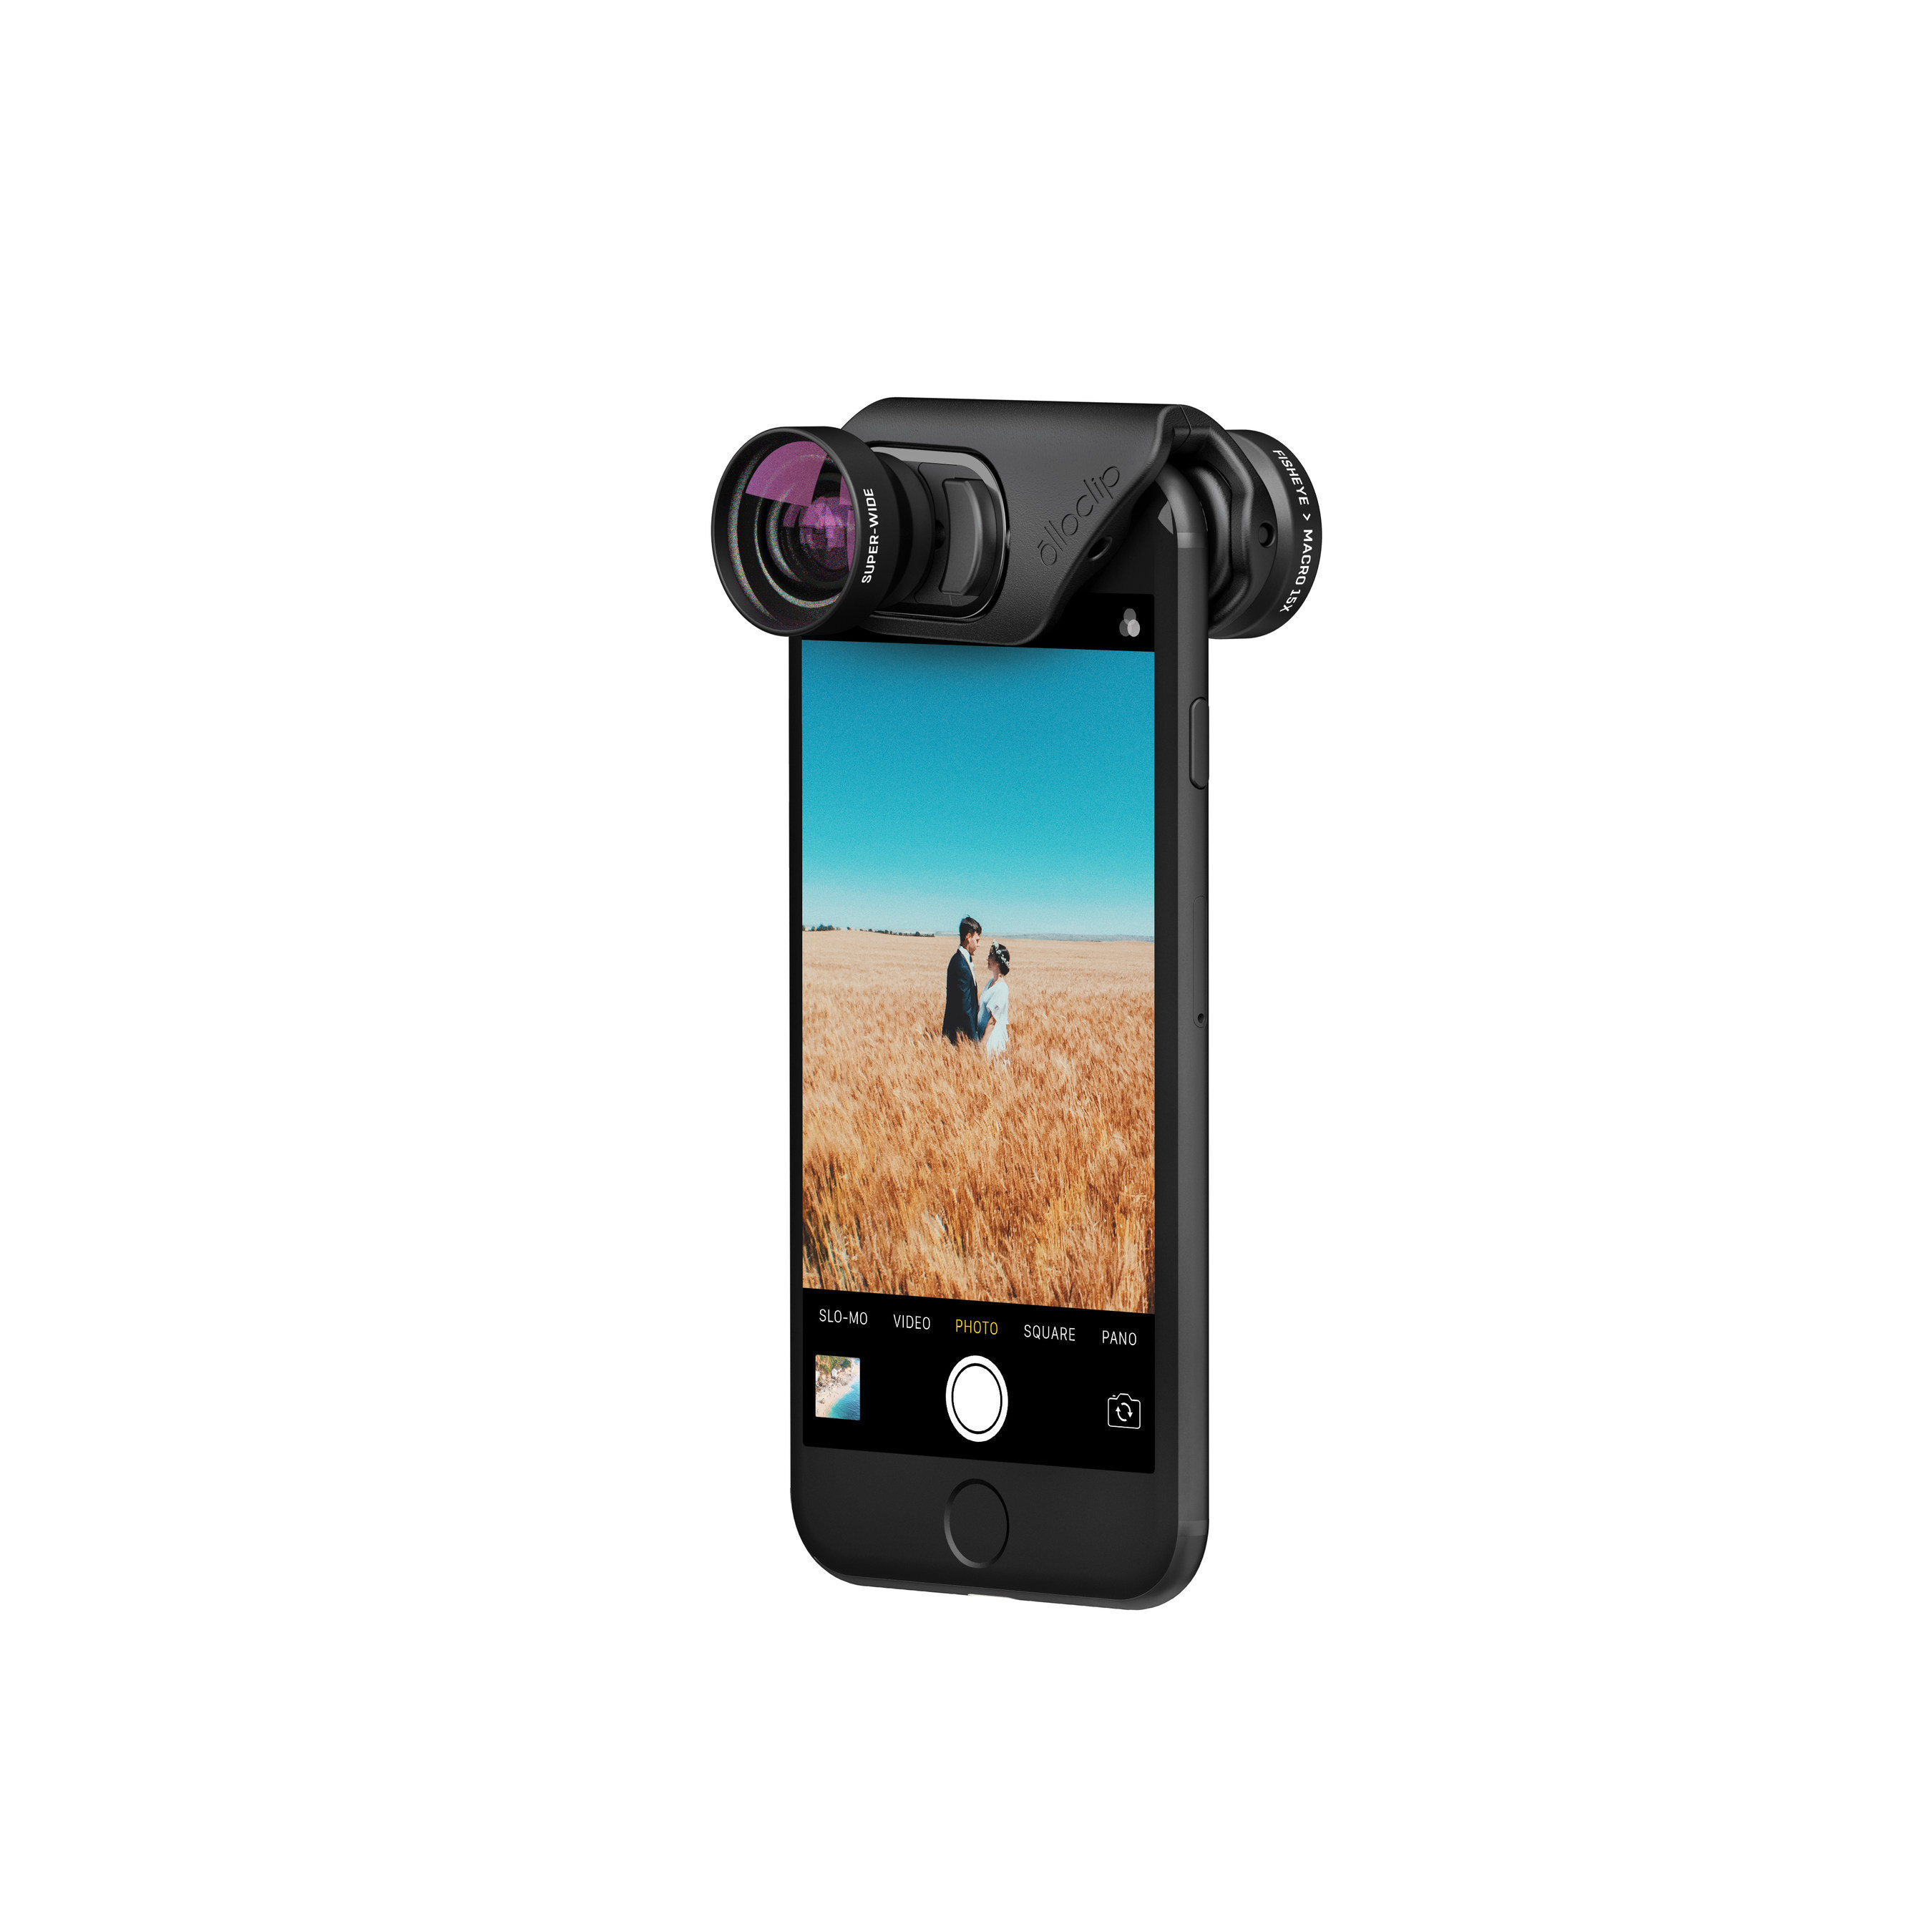 olloclip's newly designed mobile photography lens sets for iPhone 7 and 7 Plus: the Core, Active and Macro Pro lens sets.